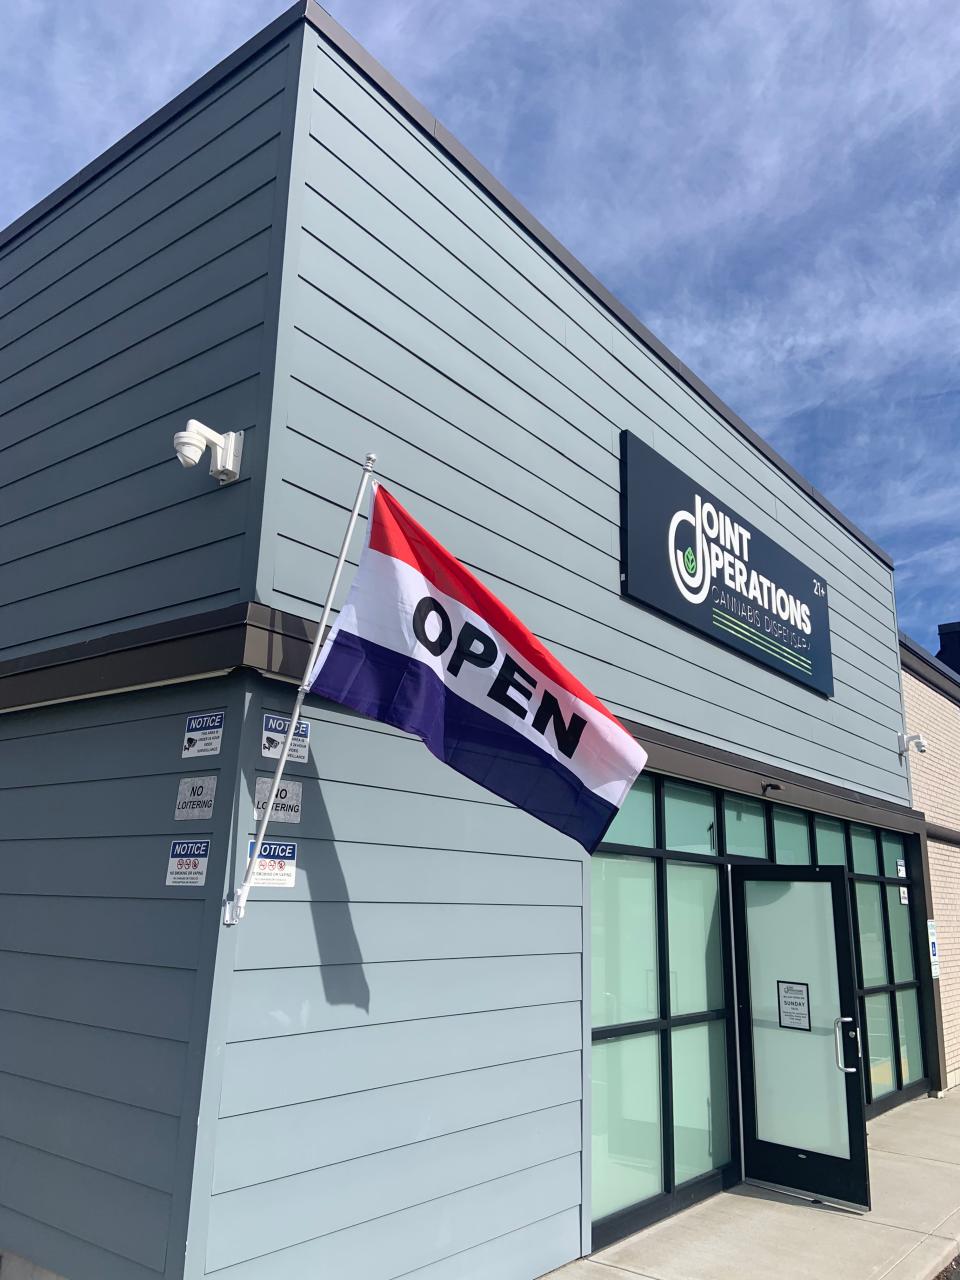 Joint Operations, a veterans-owned recreational marijuana dispensary, opened its third Massachusetts location in Timpany Crossroads in Gardner on Sunday, 4/21.